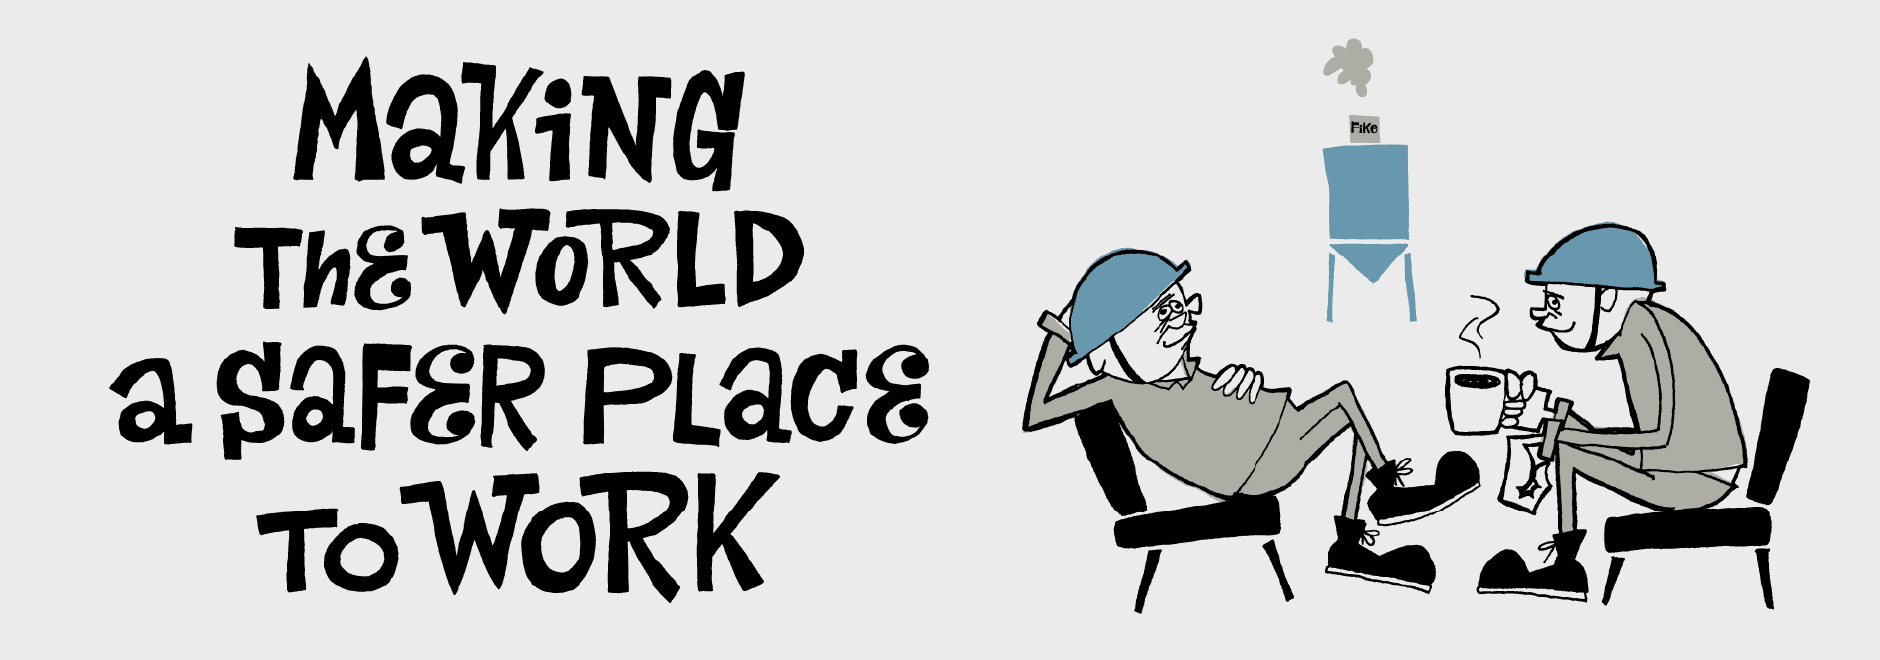 Making The World a Safer Place To Work